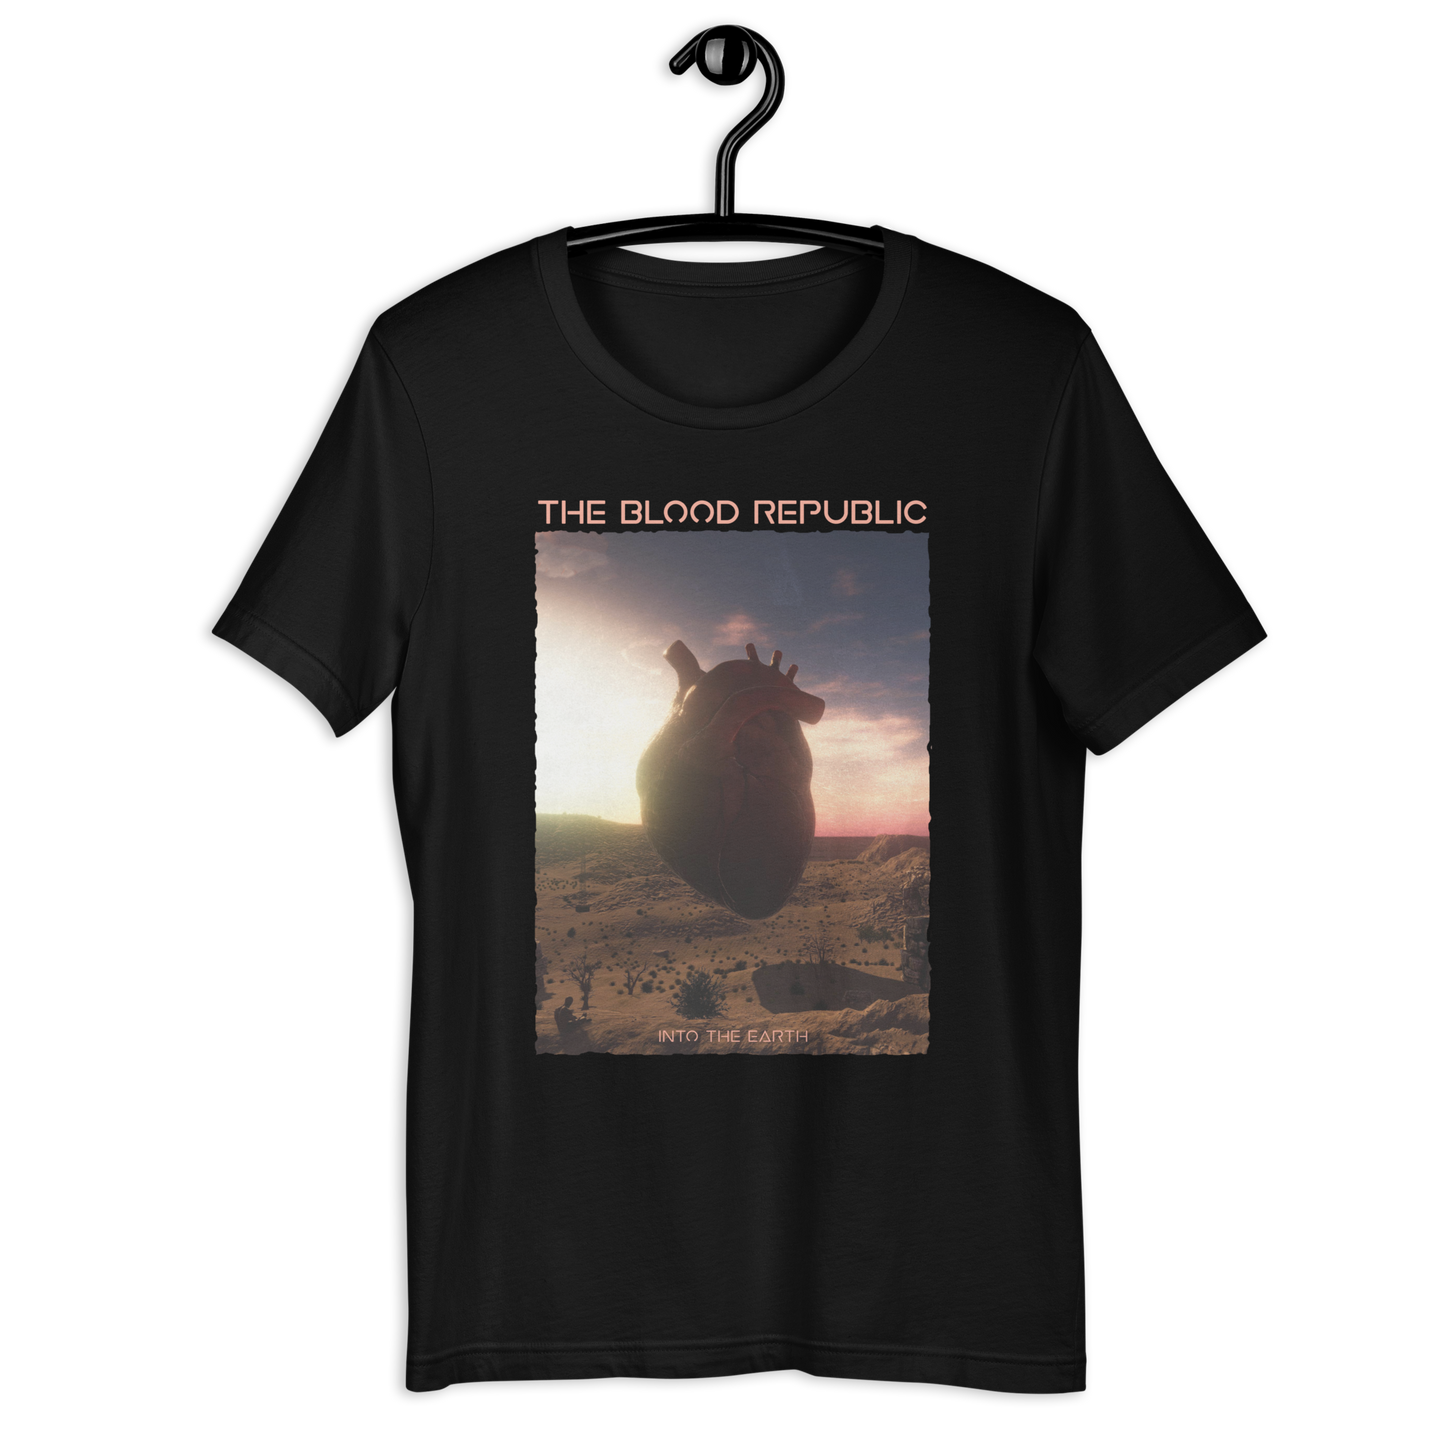 BLOOD REPUBLIC - INTO THE EARTH ARTWORK T-SHIRT